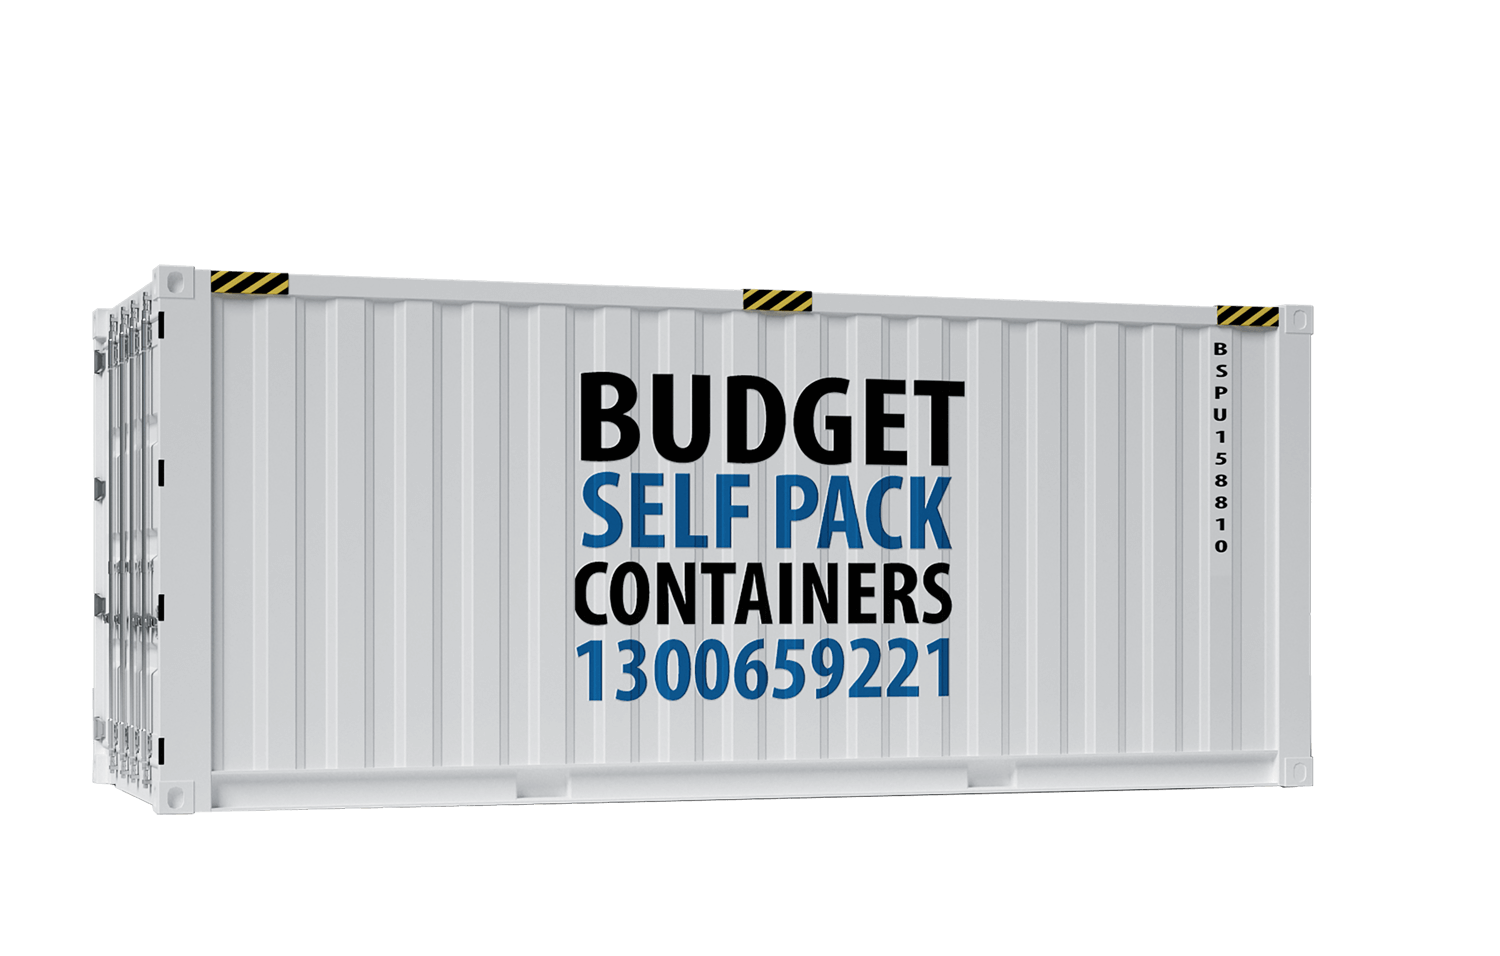 Moving container costs | Budget Self Pack Containers